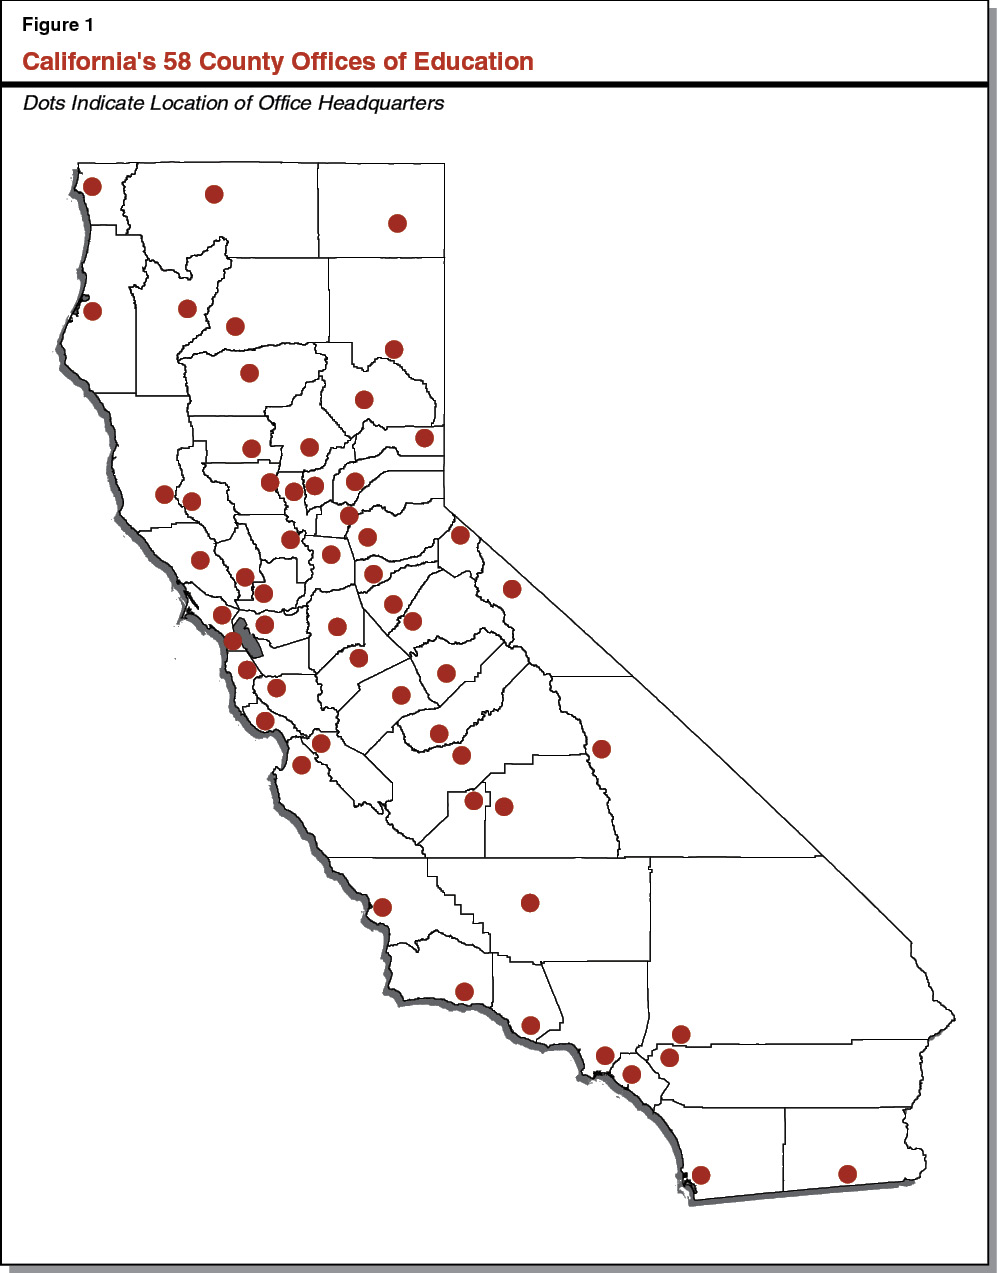 Figure 1 - California's 58 County Offices of Education